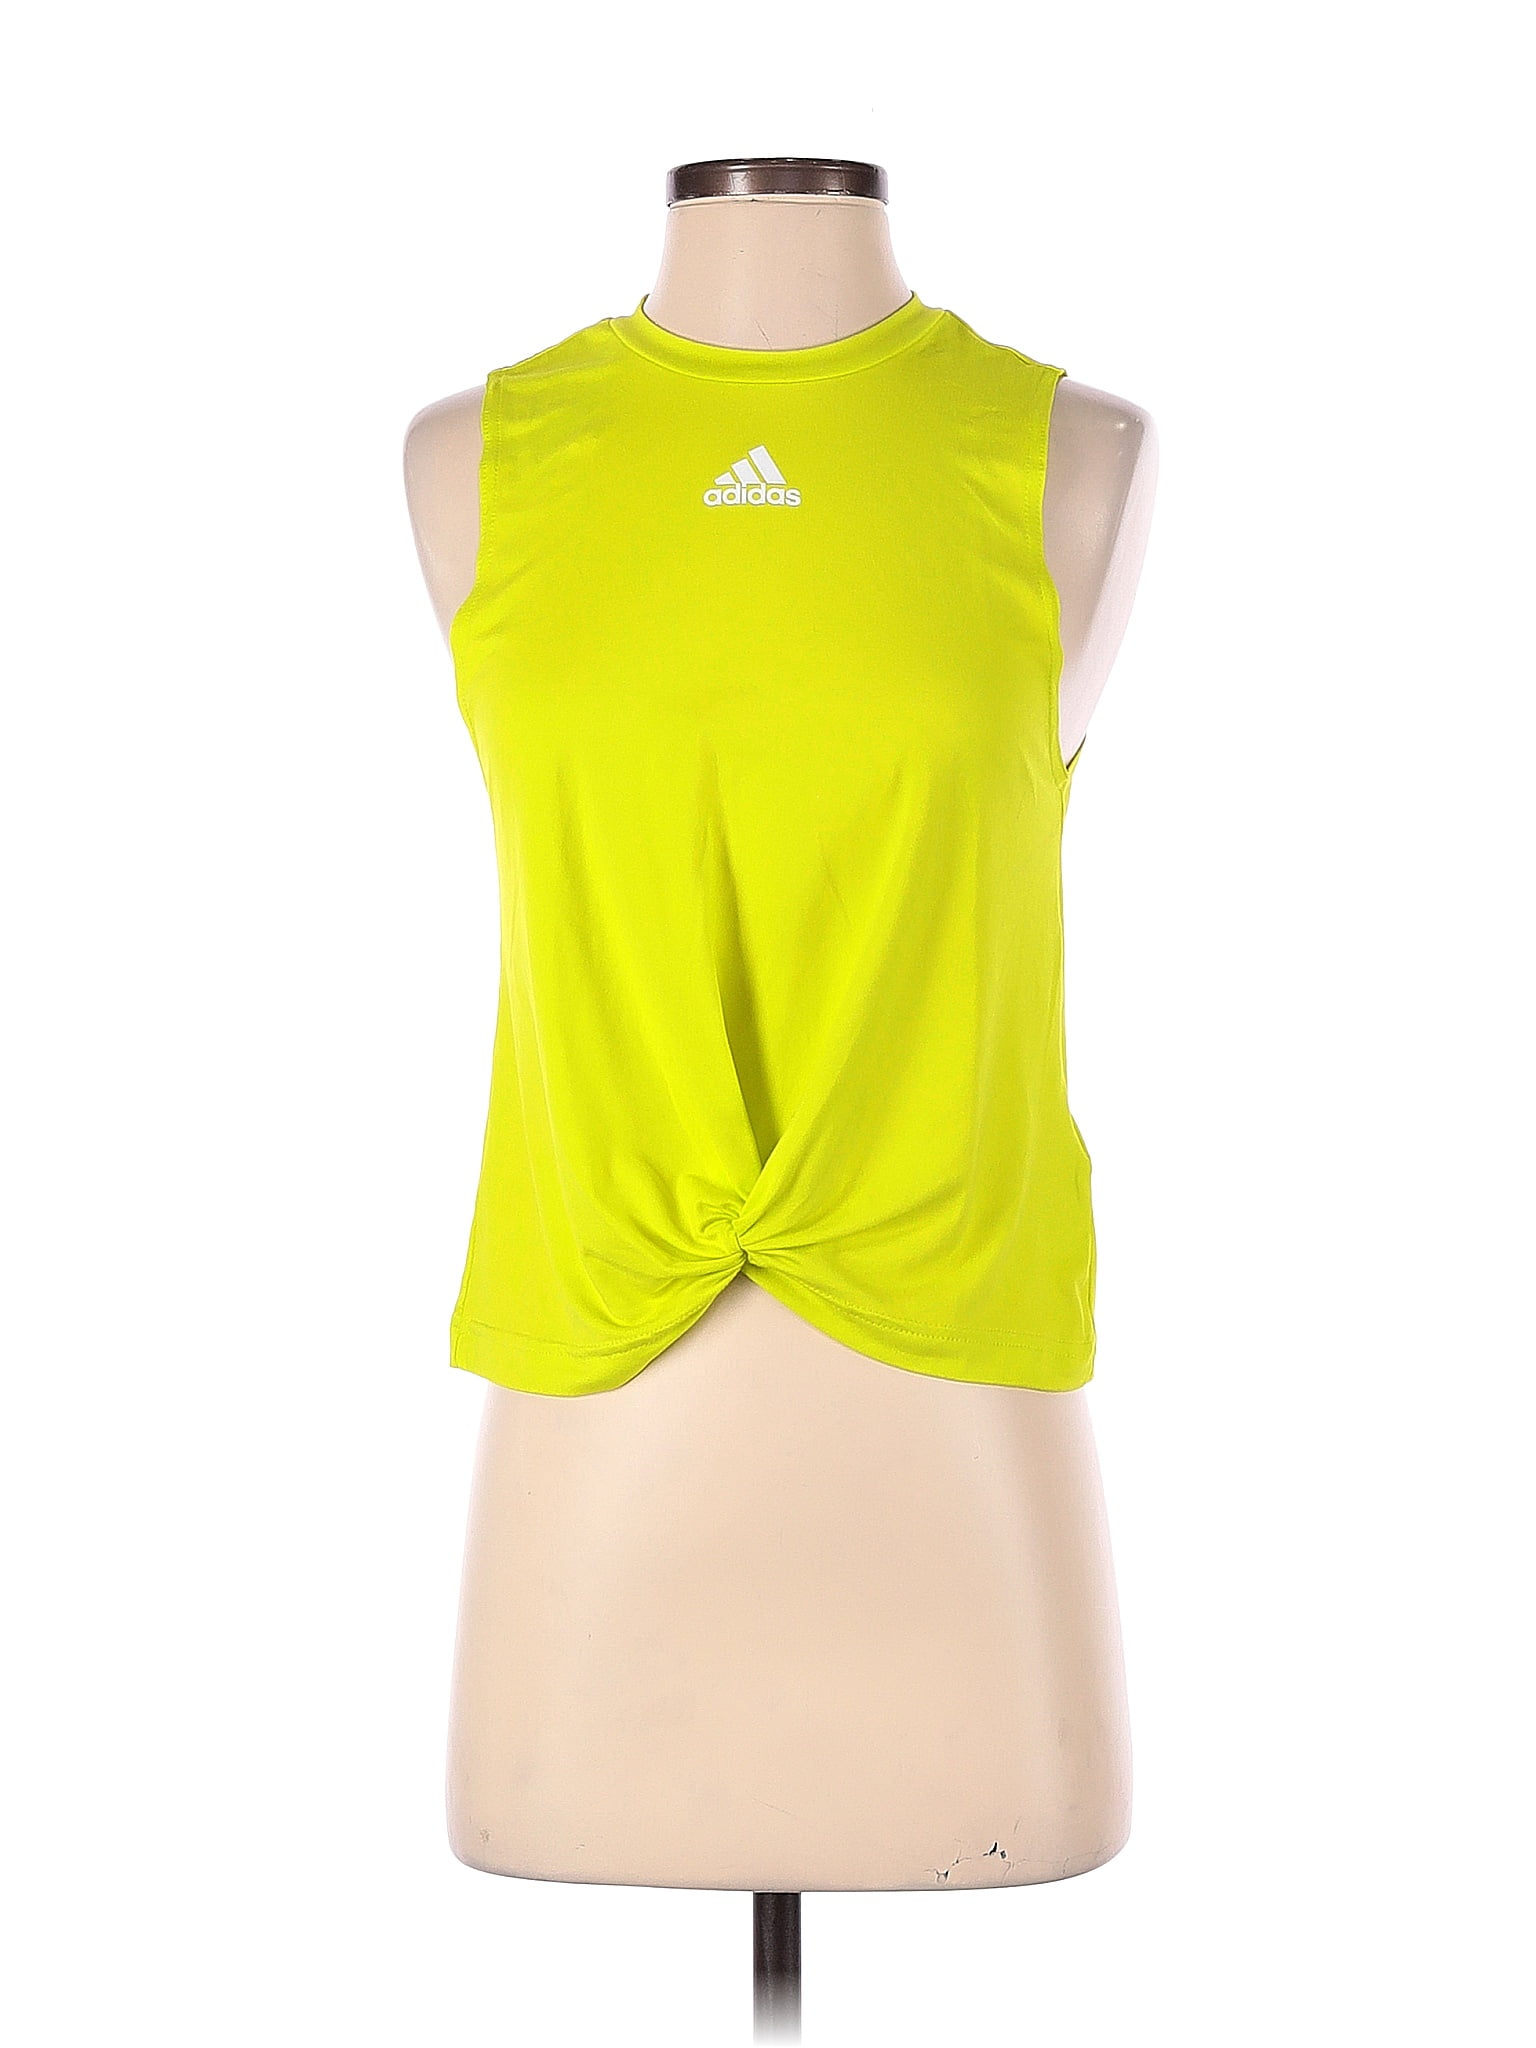 Calia by Carrie Underwood Solid Yellow Green Sports Bra Size XS